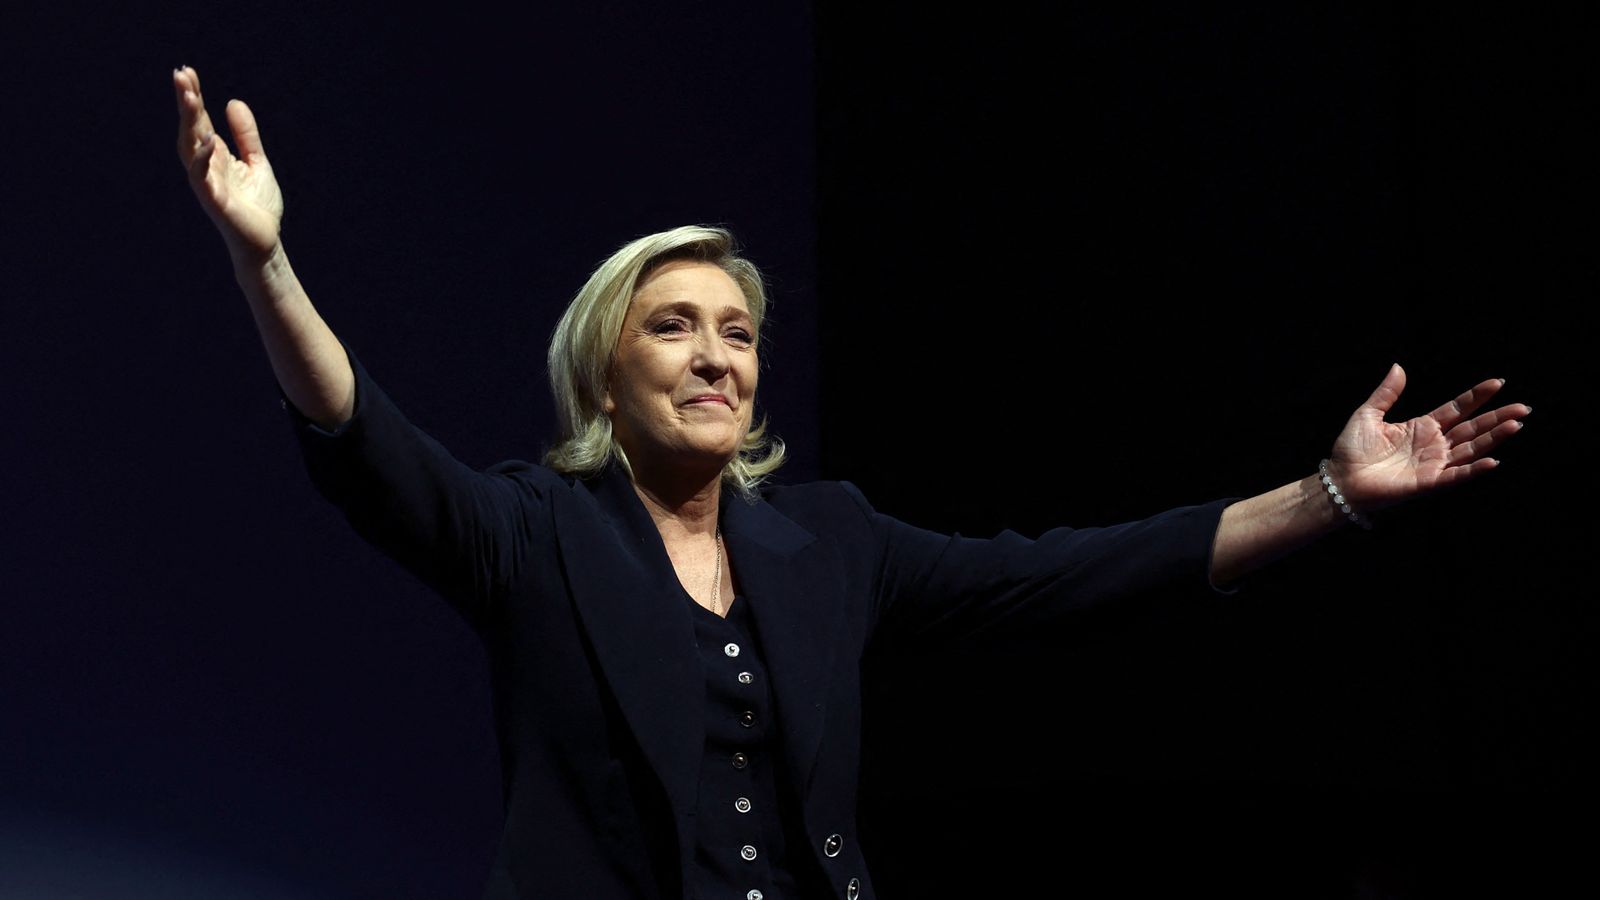 Marine Le Pen's far-right National Rally party leads in first round of French election